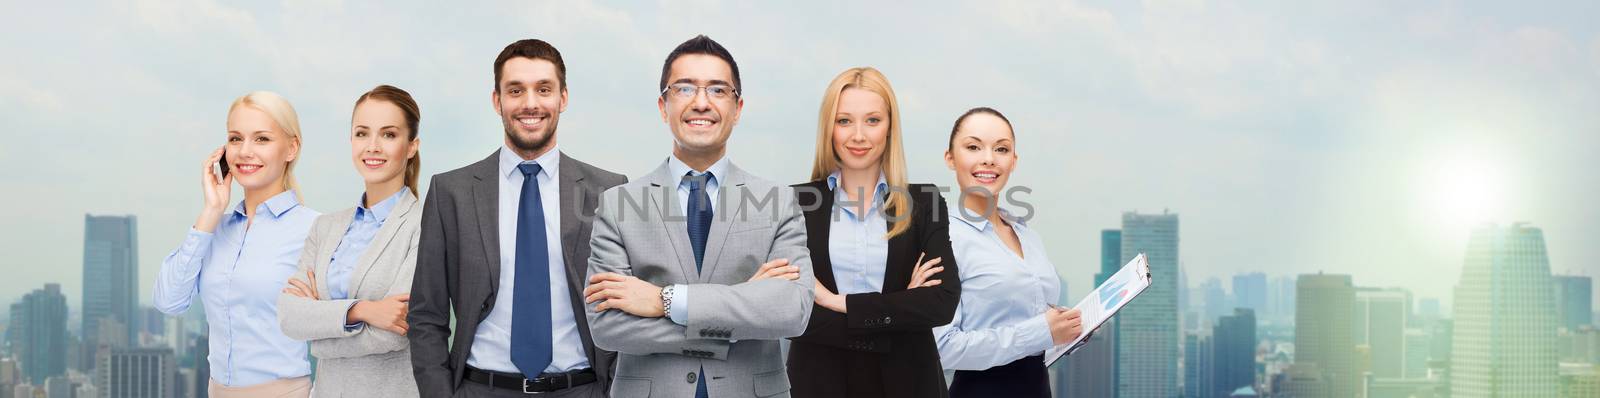 group of smiling businessmen over city background by dolgachov